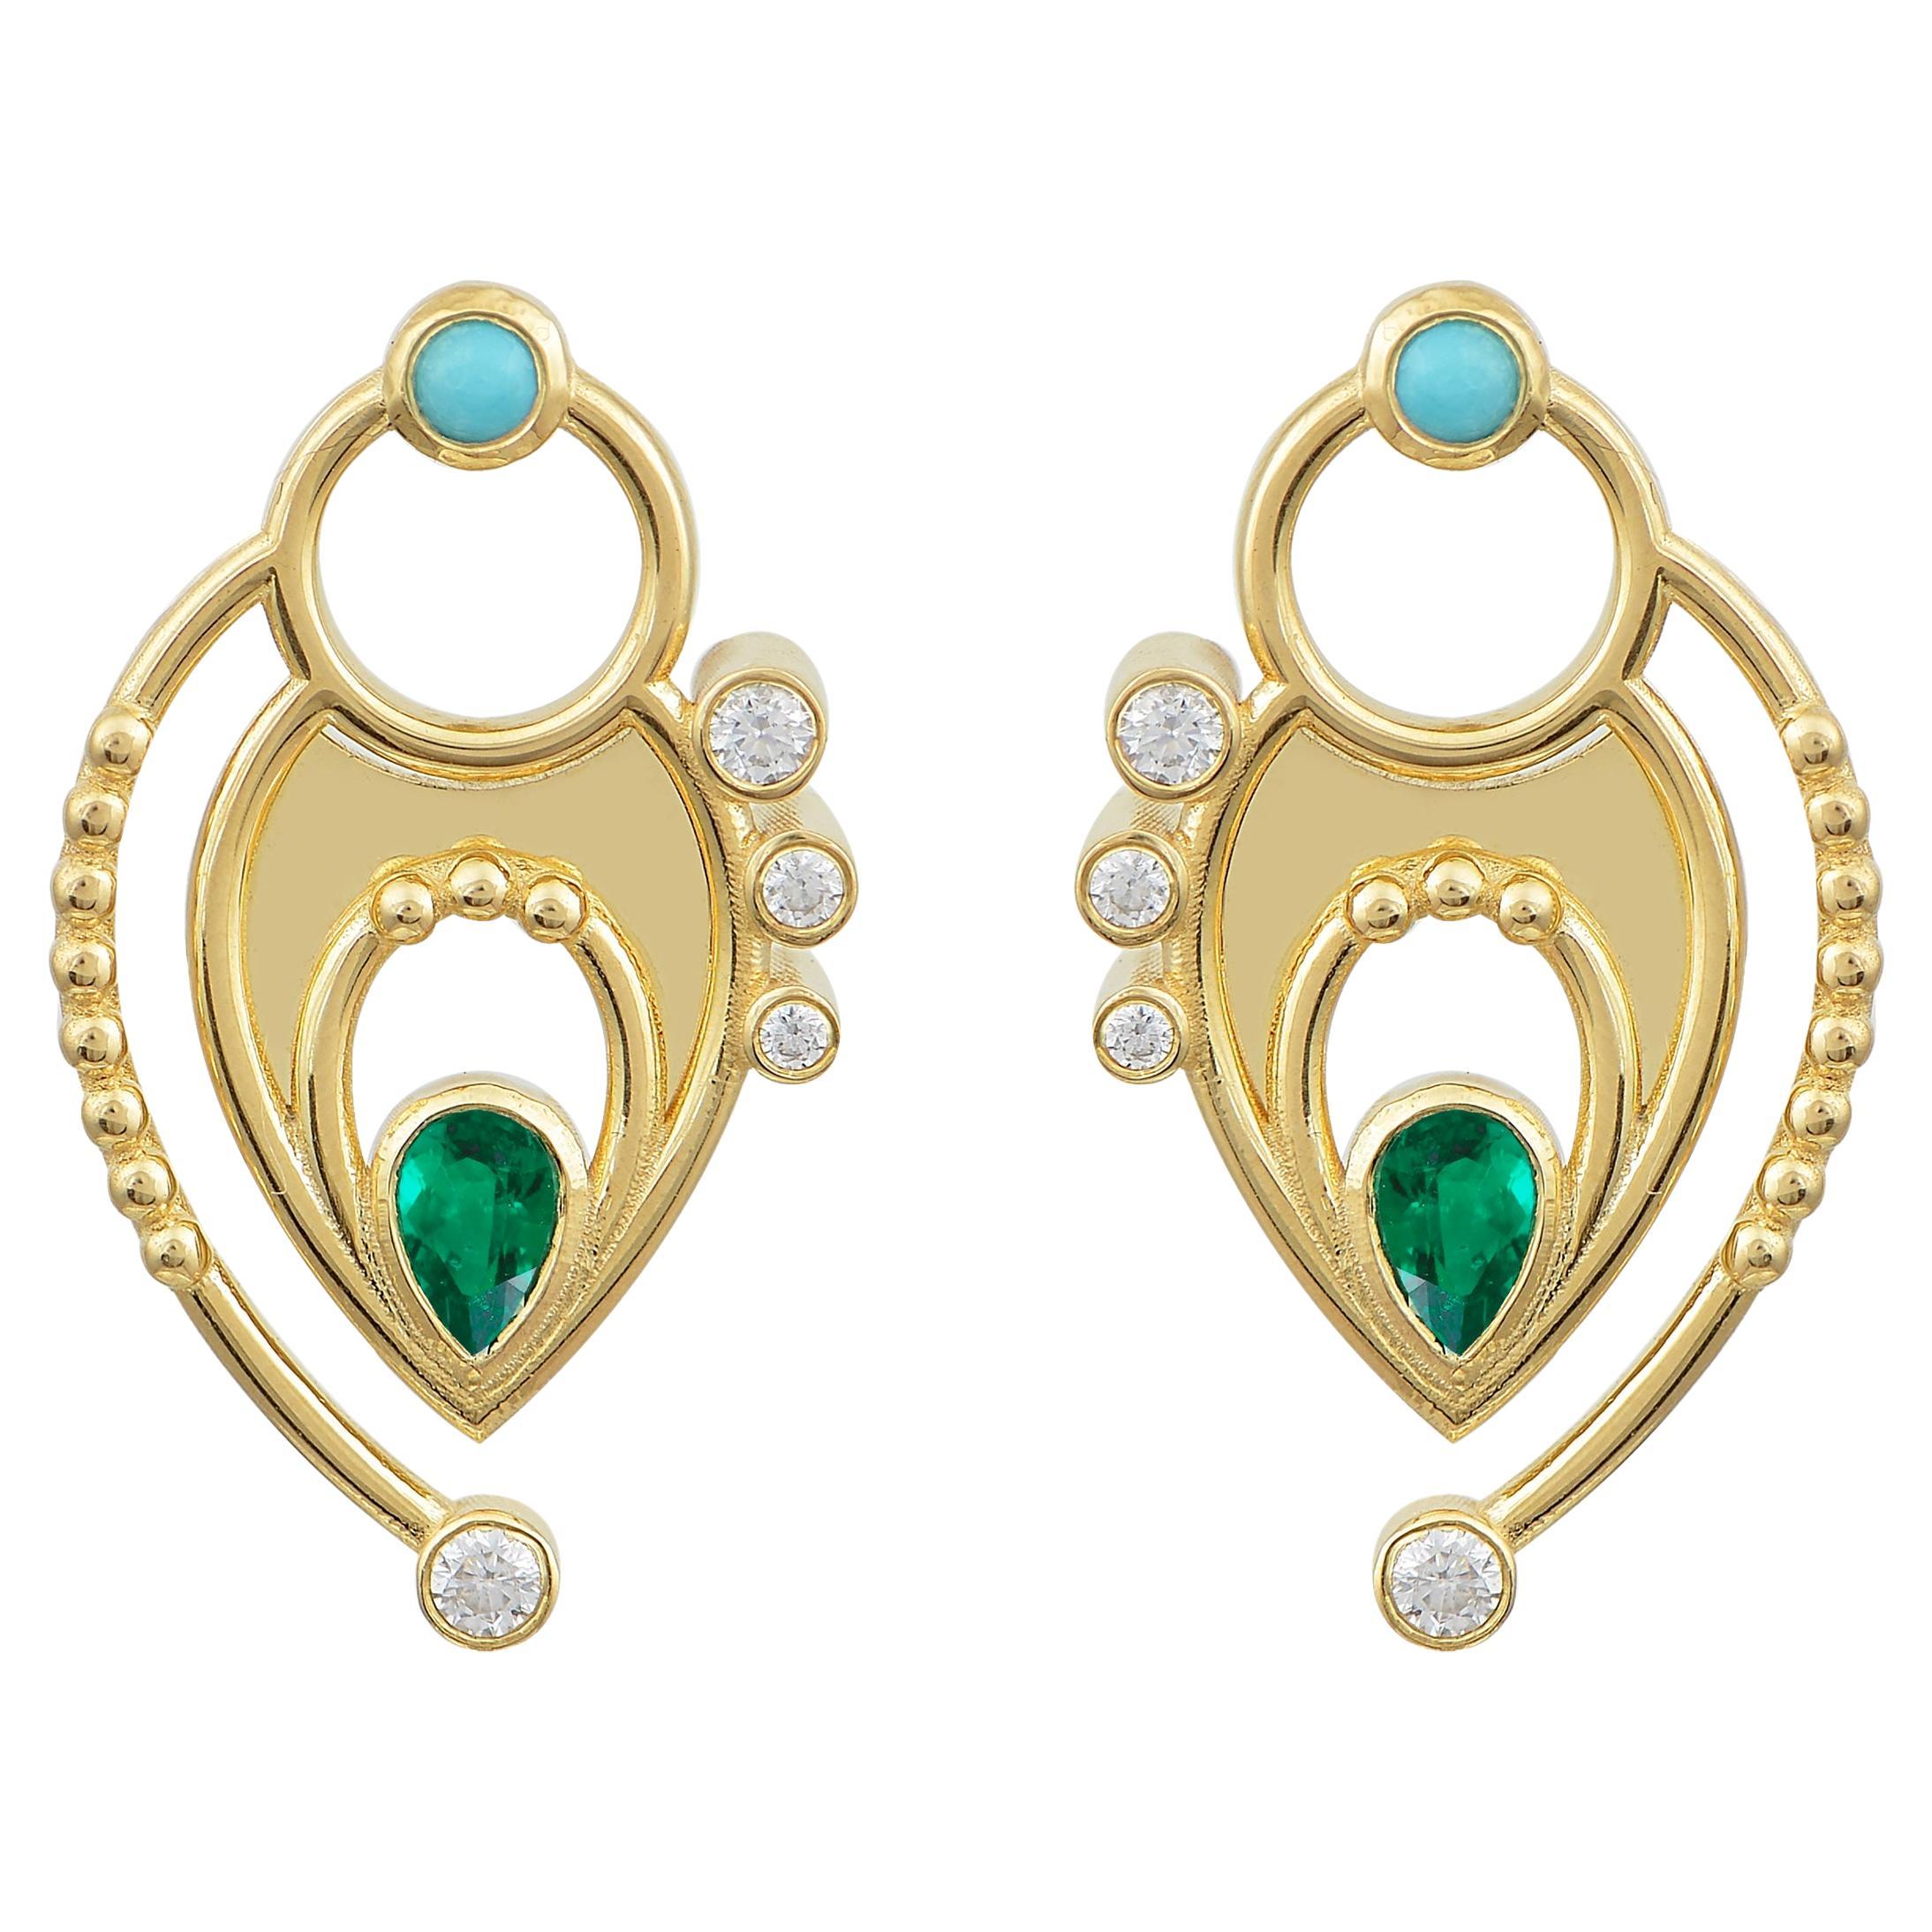 Pear Shaped Earrings in 18 Karat Yellow Gold with Diamonds, Emeralds, Turquoise For Sale